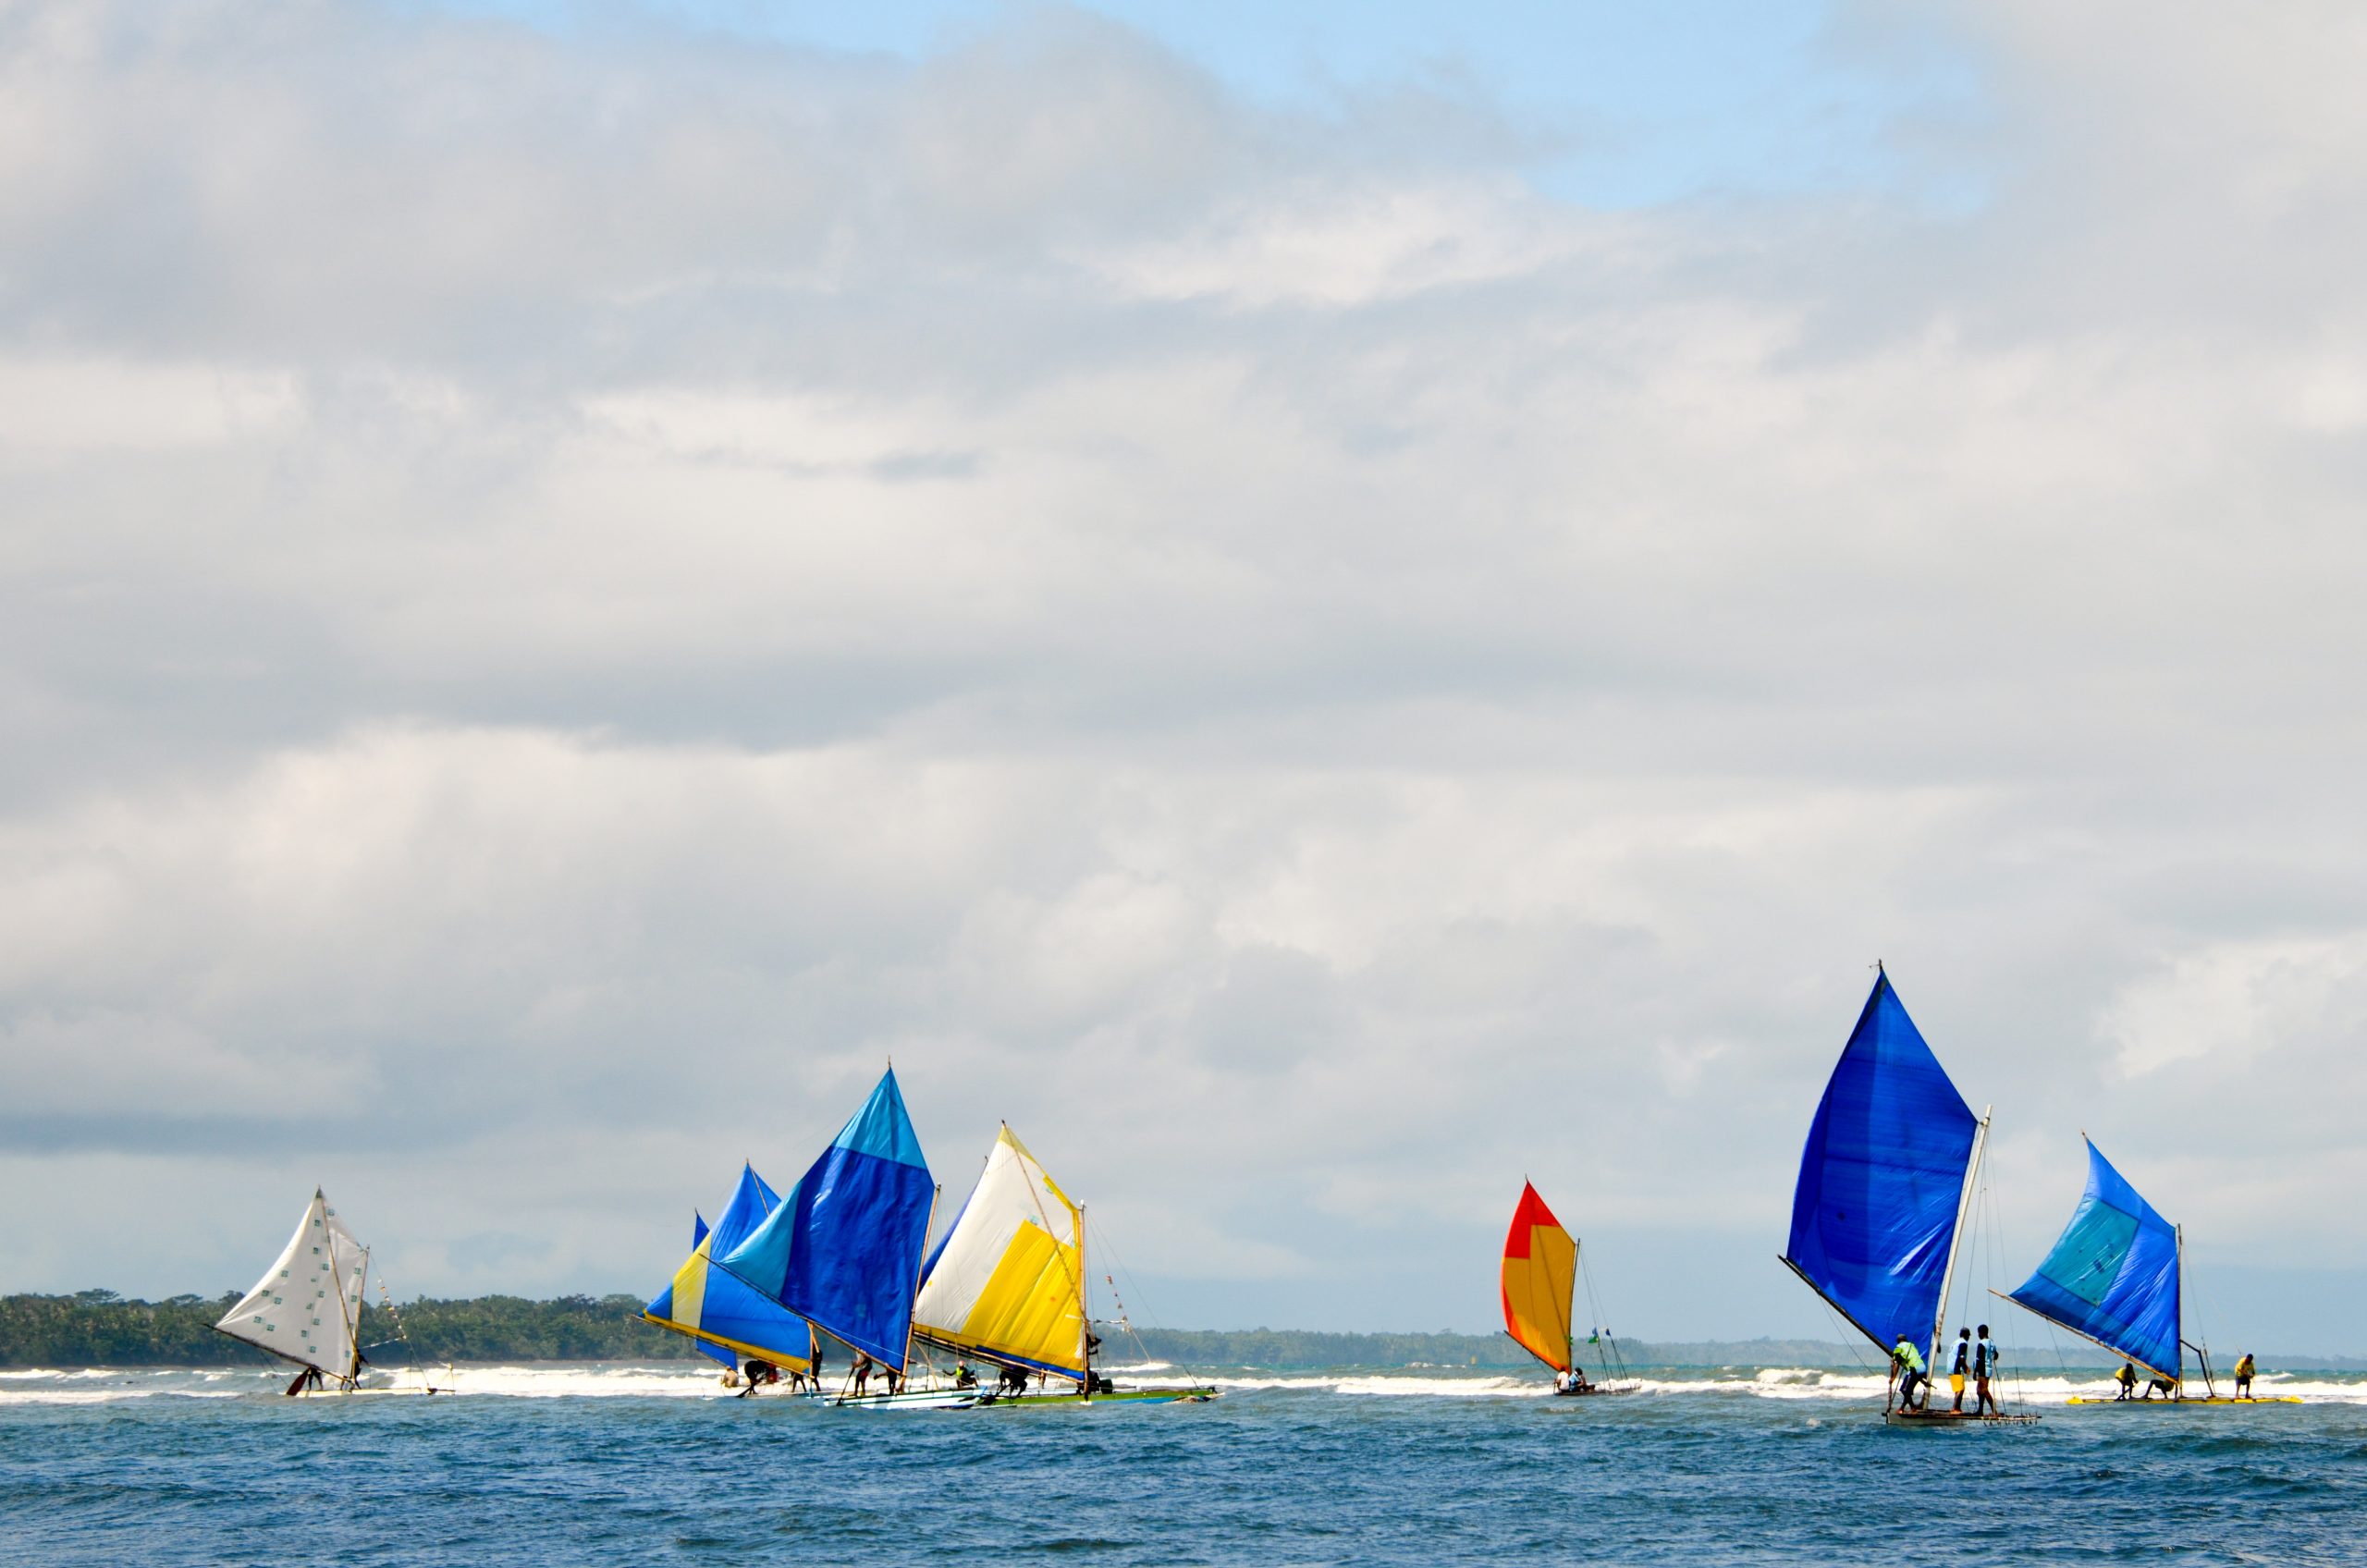 In Gadaisu, Papua New Guinea (PNG), brightly coloured, blue, orange, yellow and white sail boats race out over a blue sea towards a reef break. White clouds hang overhead and rainforest can be seen in the distance.